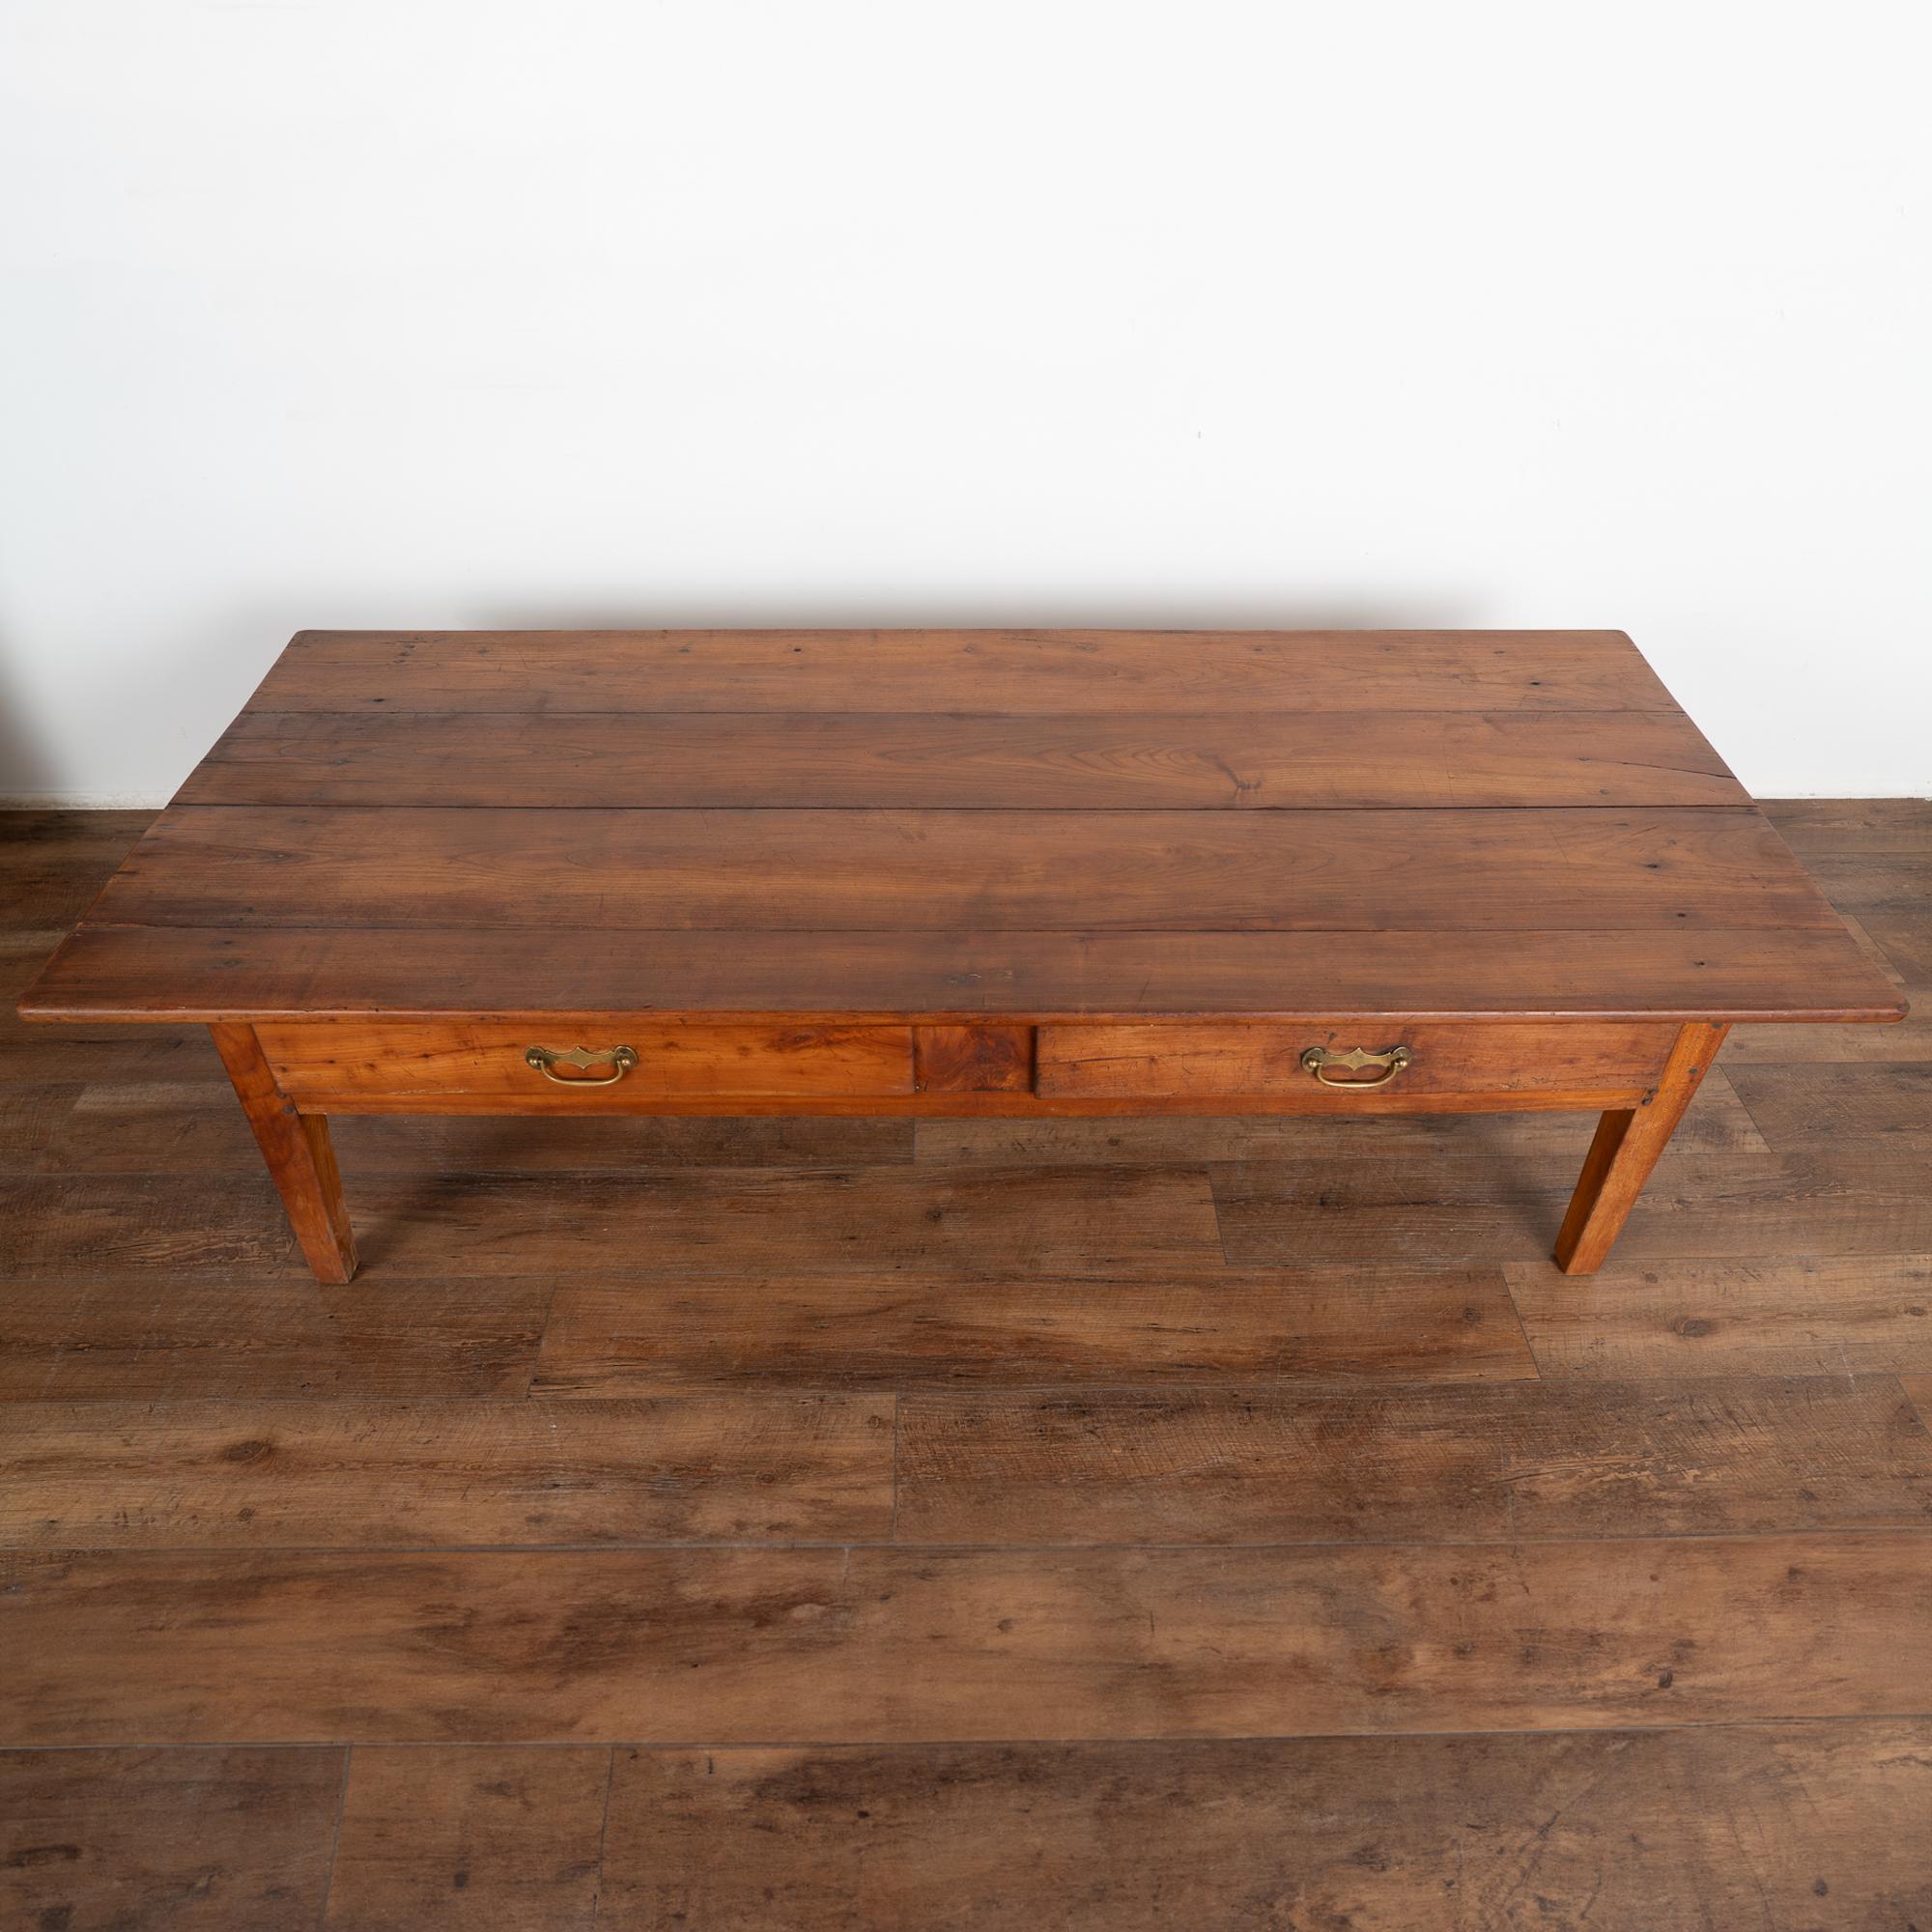 Large French Country Cherry Wood Coffee Table, circa 1820-40 1